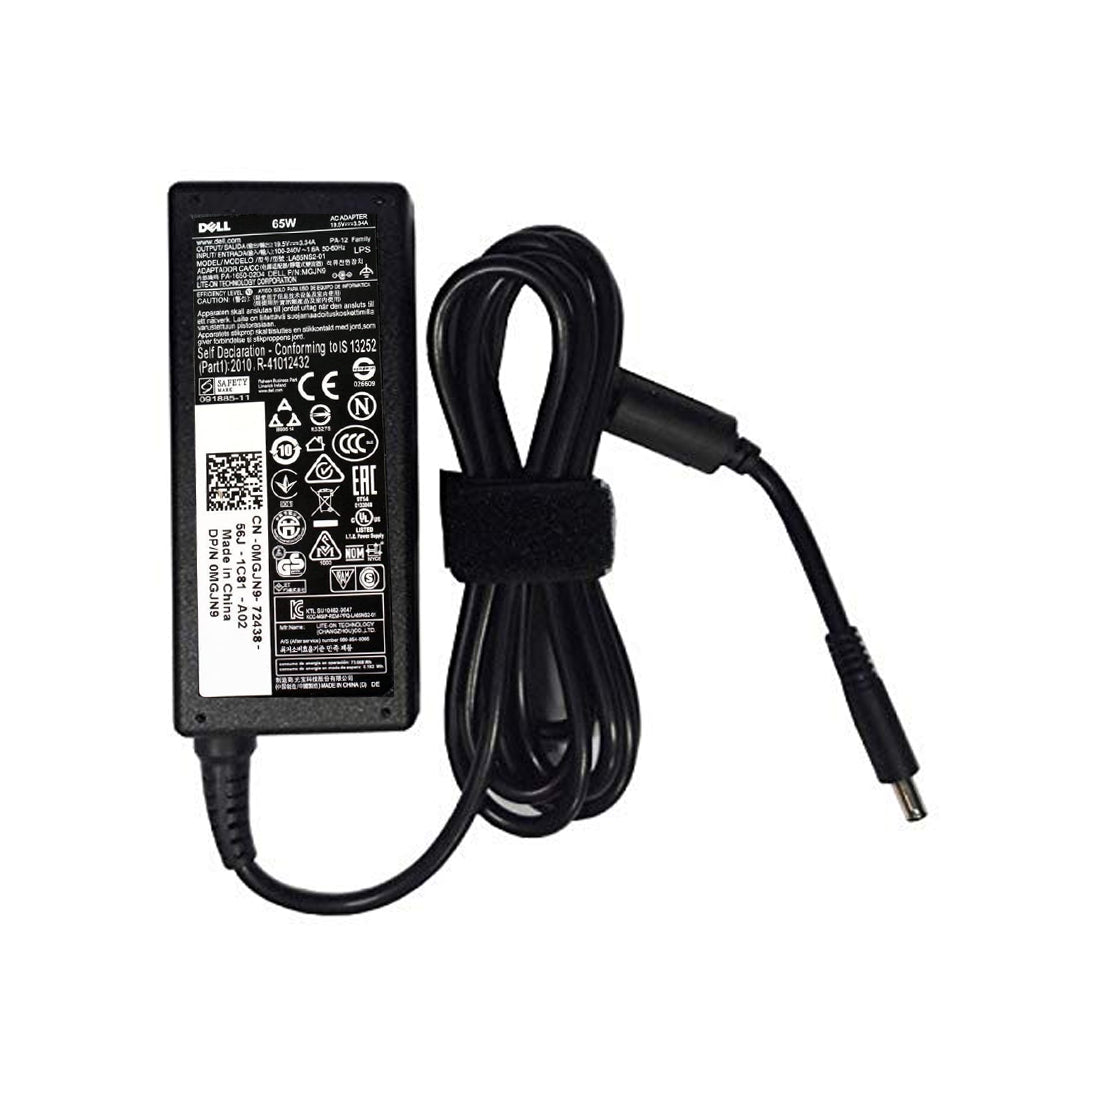 Dell Original 65W 19.5V 4.5mm Pin Laptop Charger Adapter for Inspiron 13 7373 With Power Cord